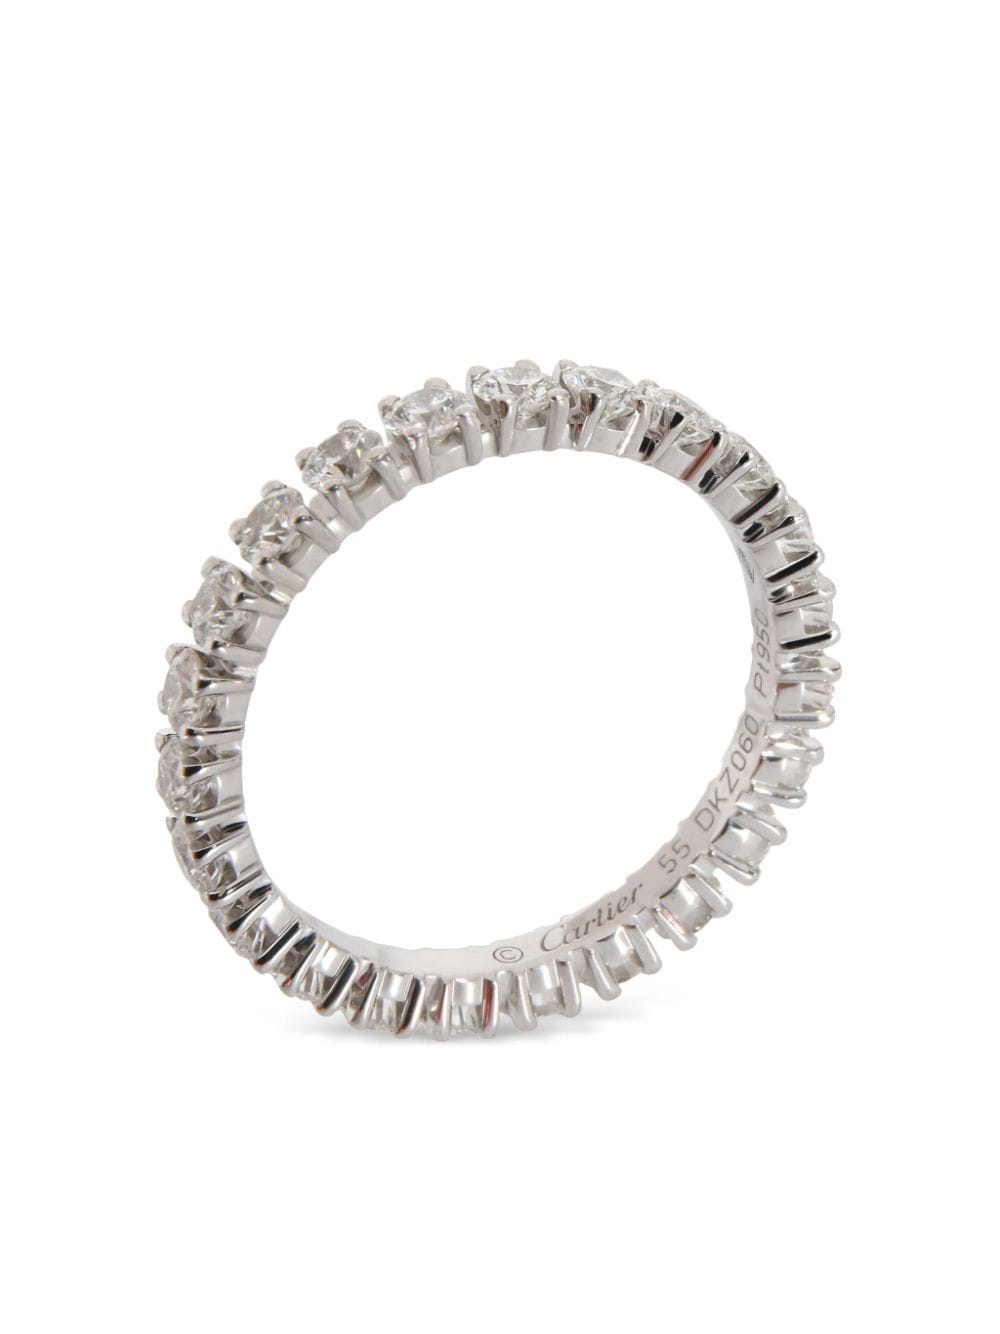 Pre-owned Cartier  Platinum Destinee Diamond Eternity Ring In Silver